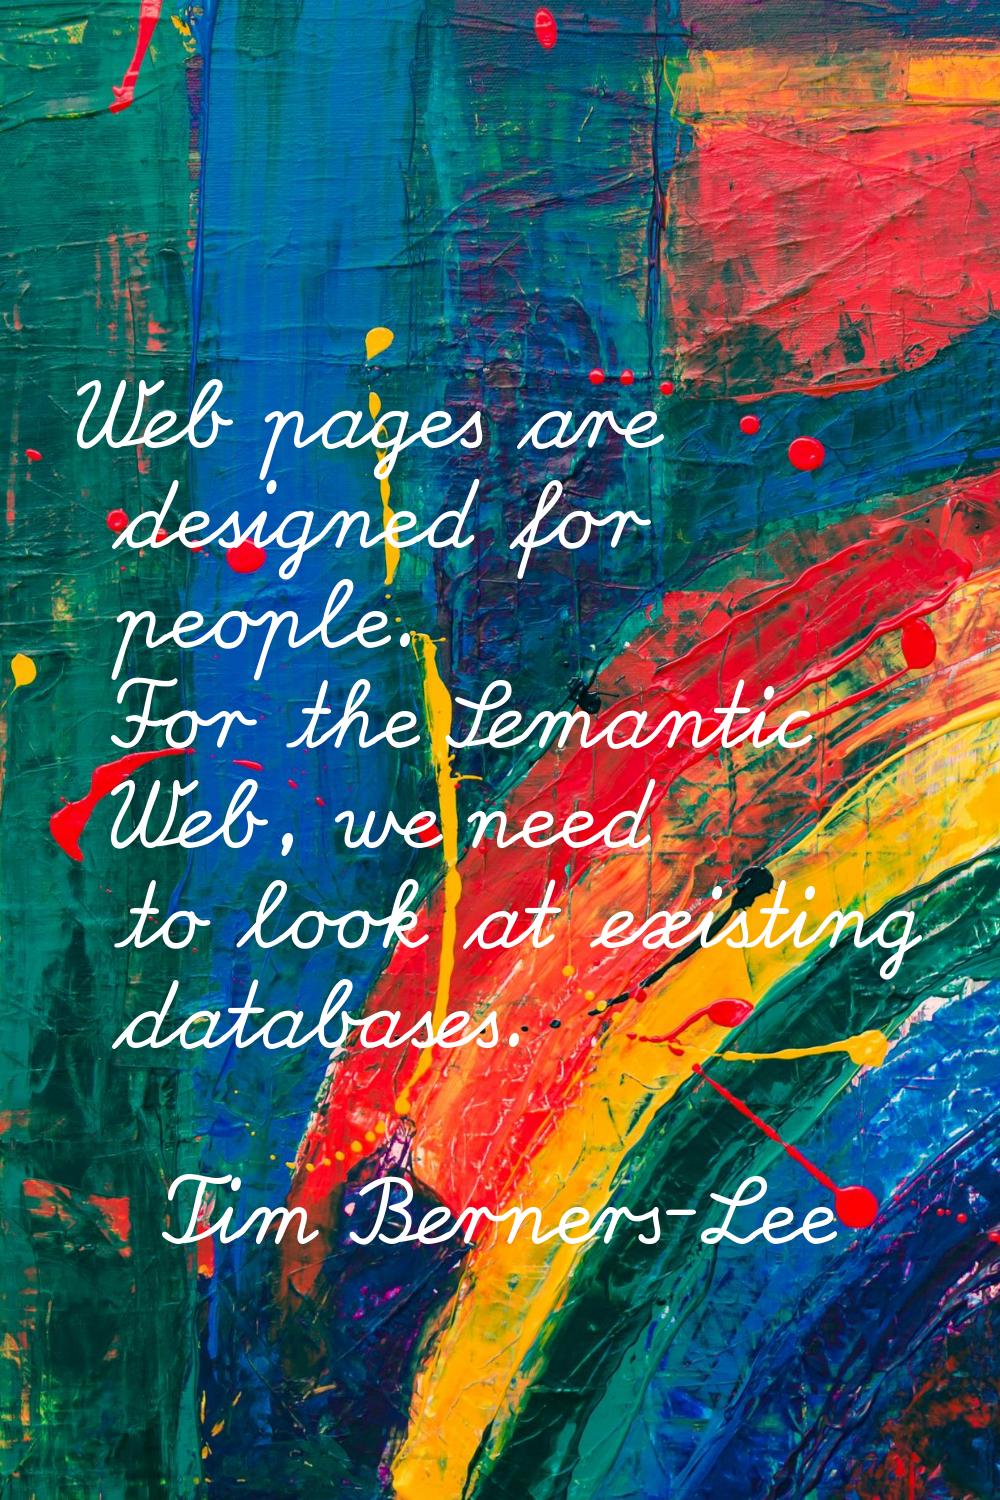 Web pages are designed for people. For the Semantic Web, we need to look at existing databases.